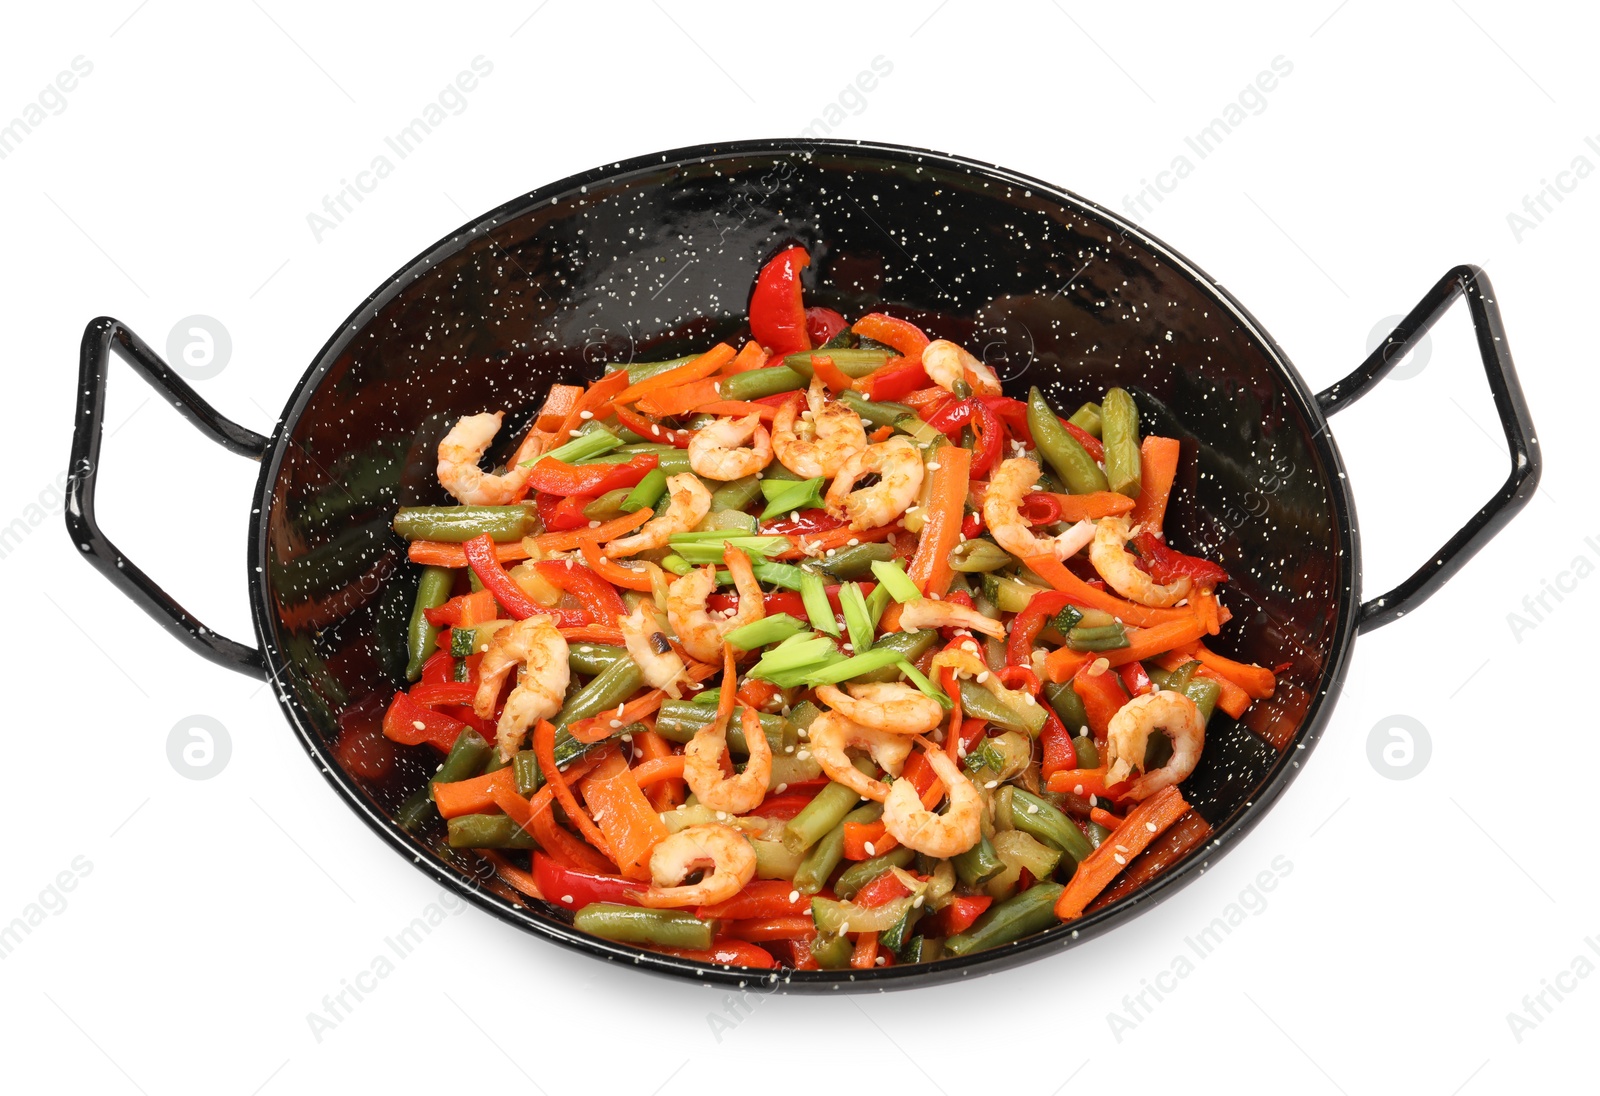 Photo of Shrimp stir fry with vegetables in wok on white background